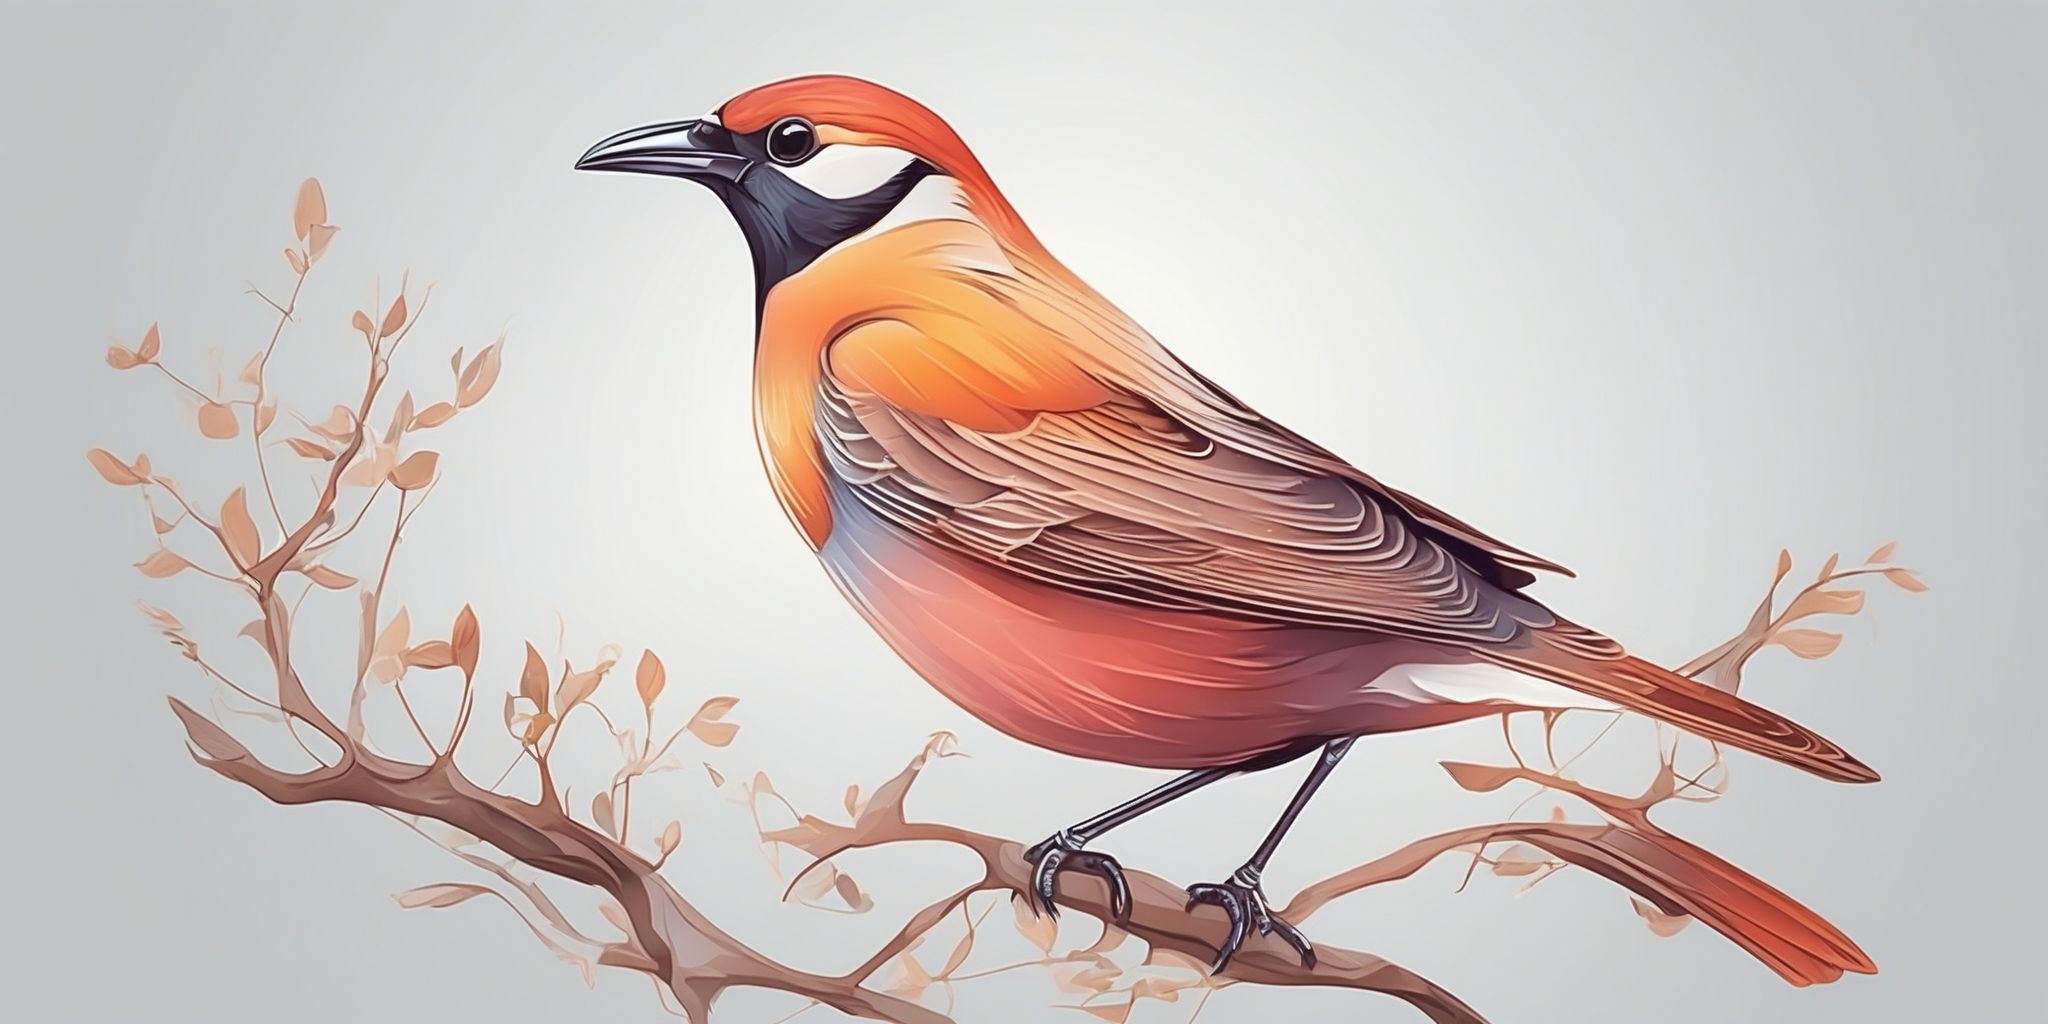 Bird in illustration style with gradients and white background